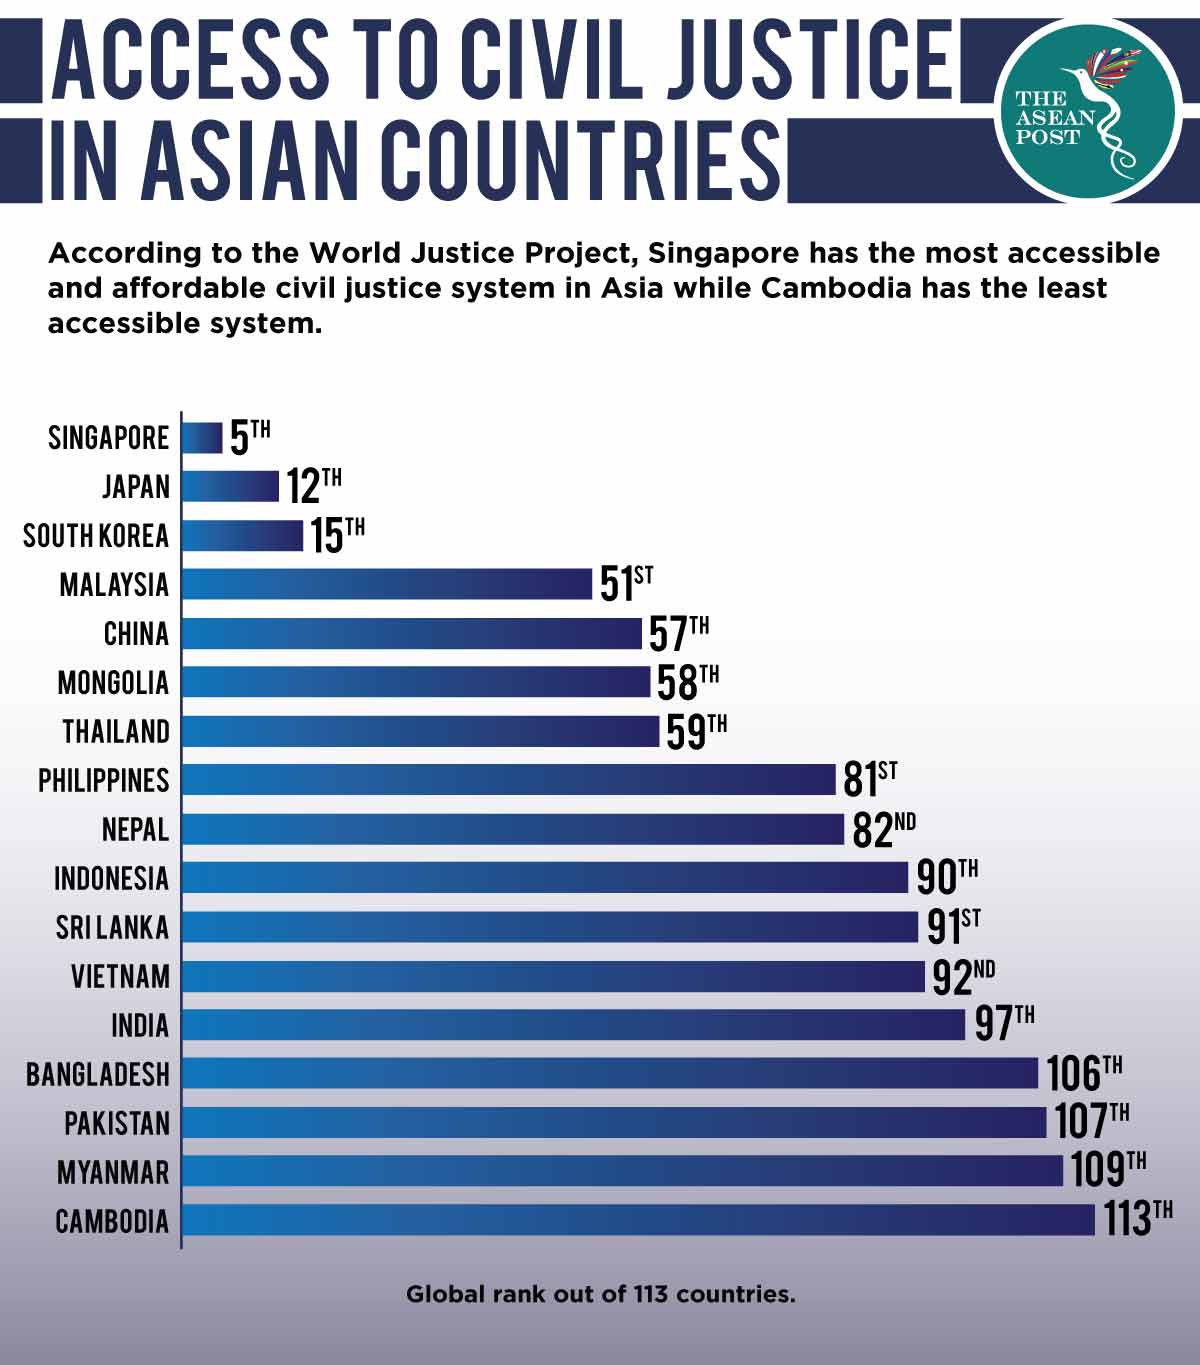 Access to Civil Justice in Asian Countries